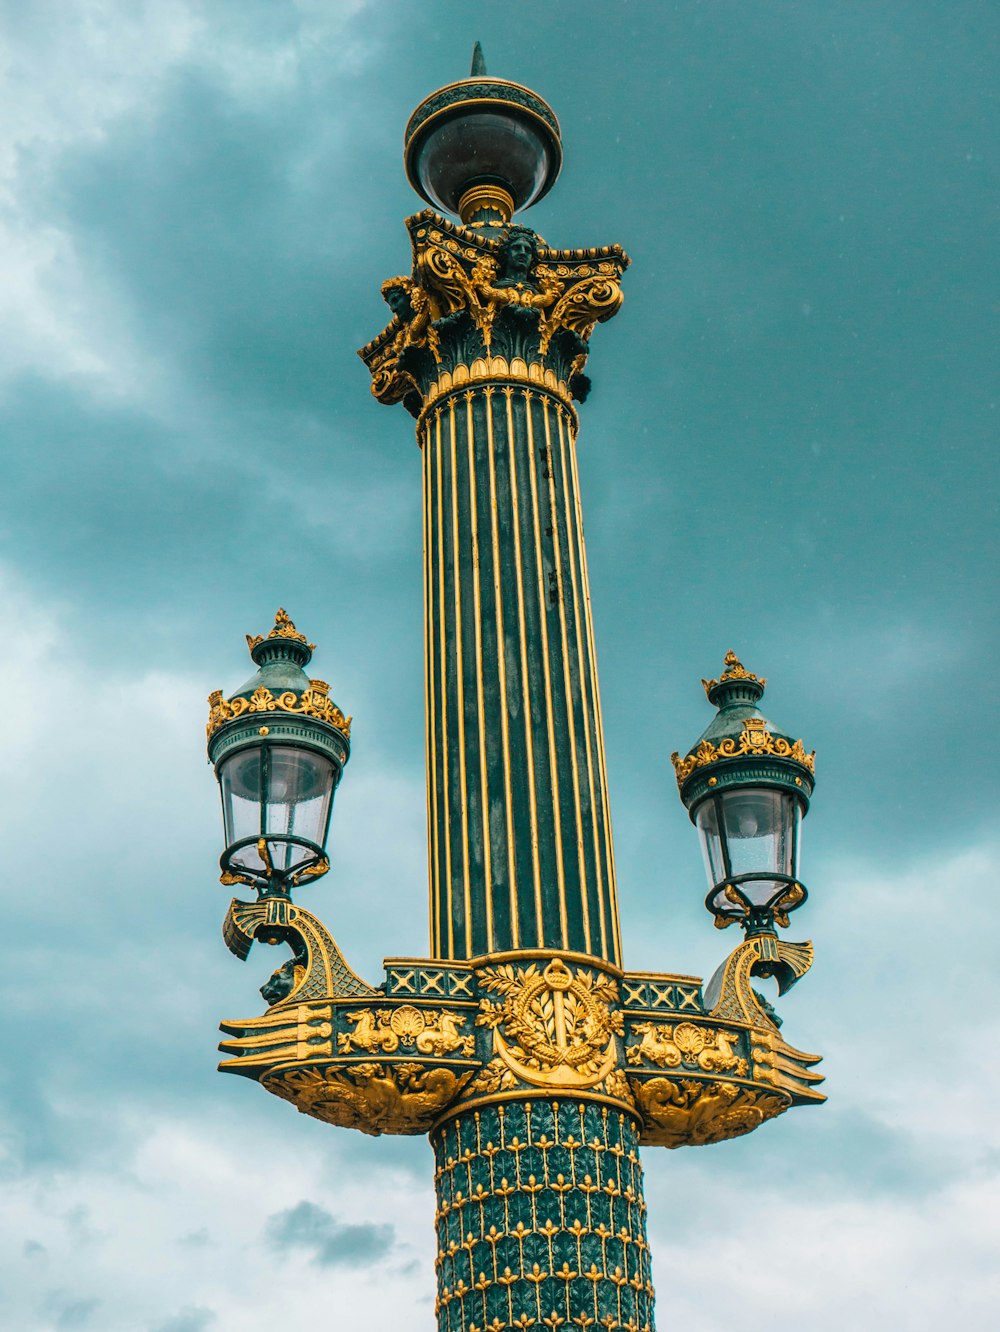 gold and black tower under cloudy sky